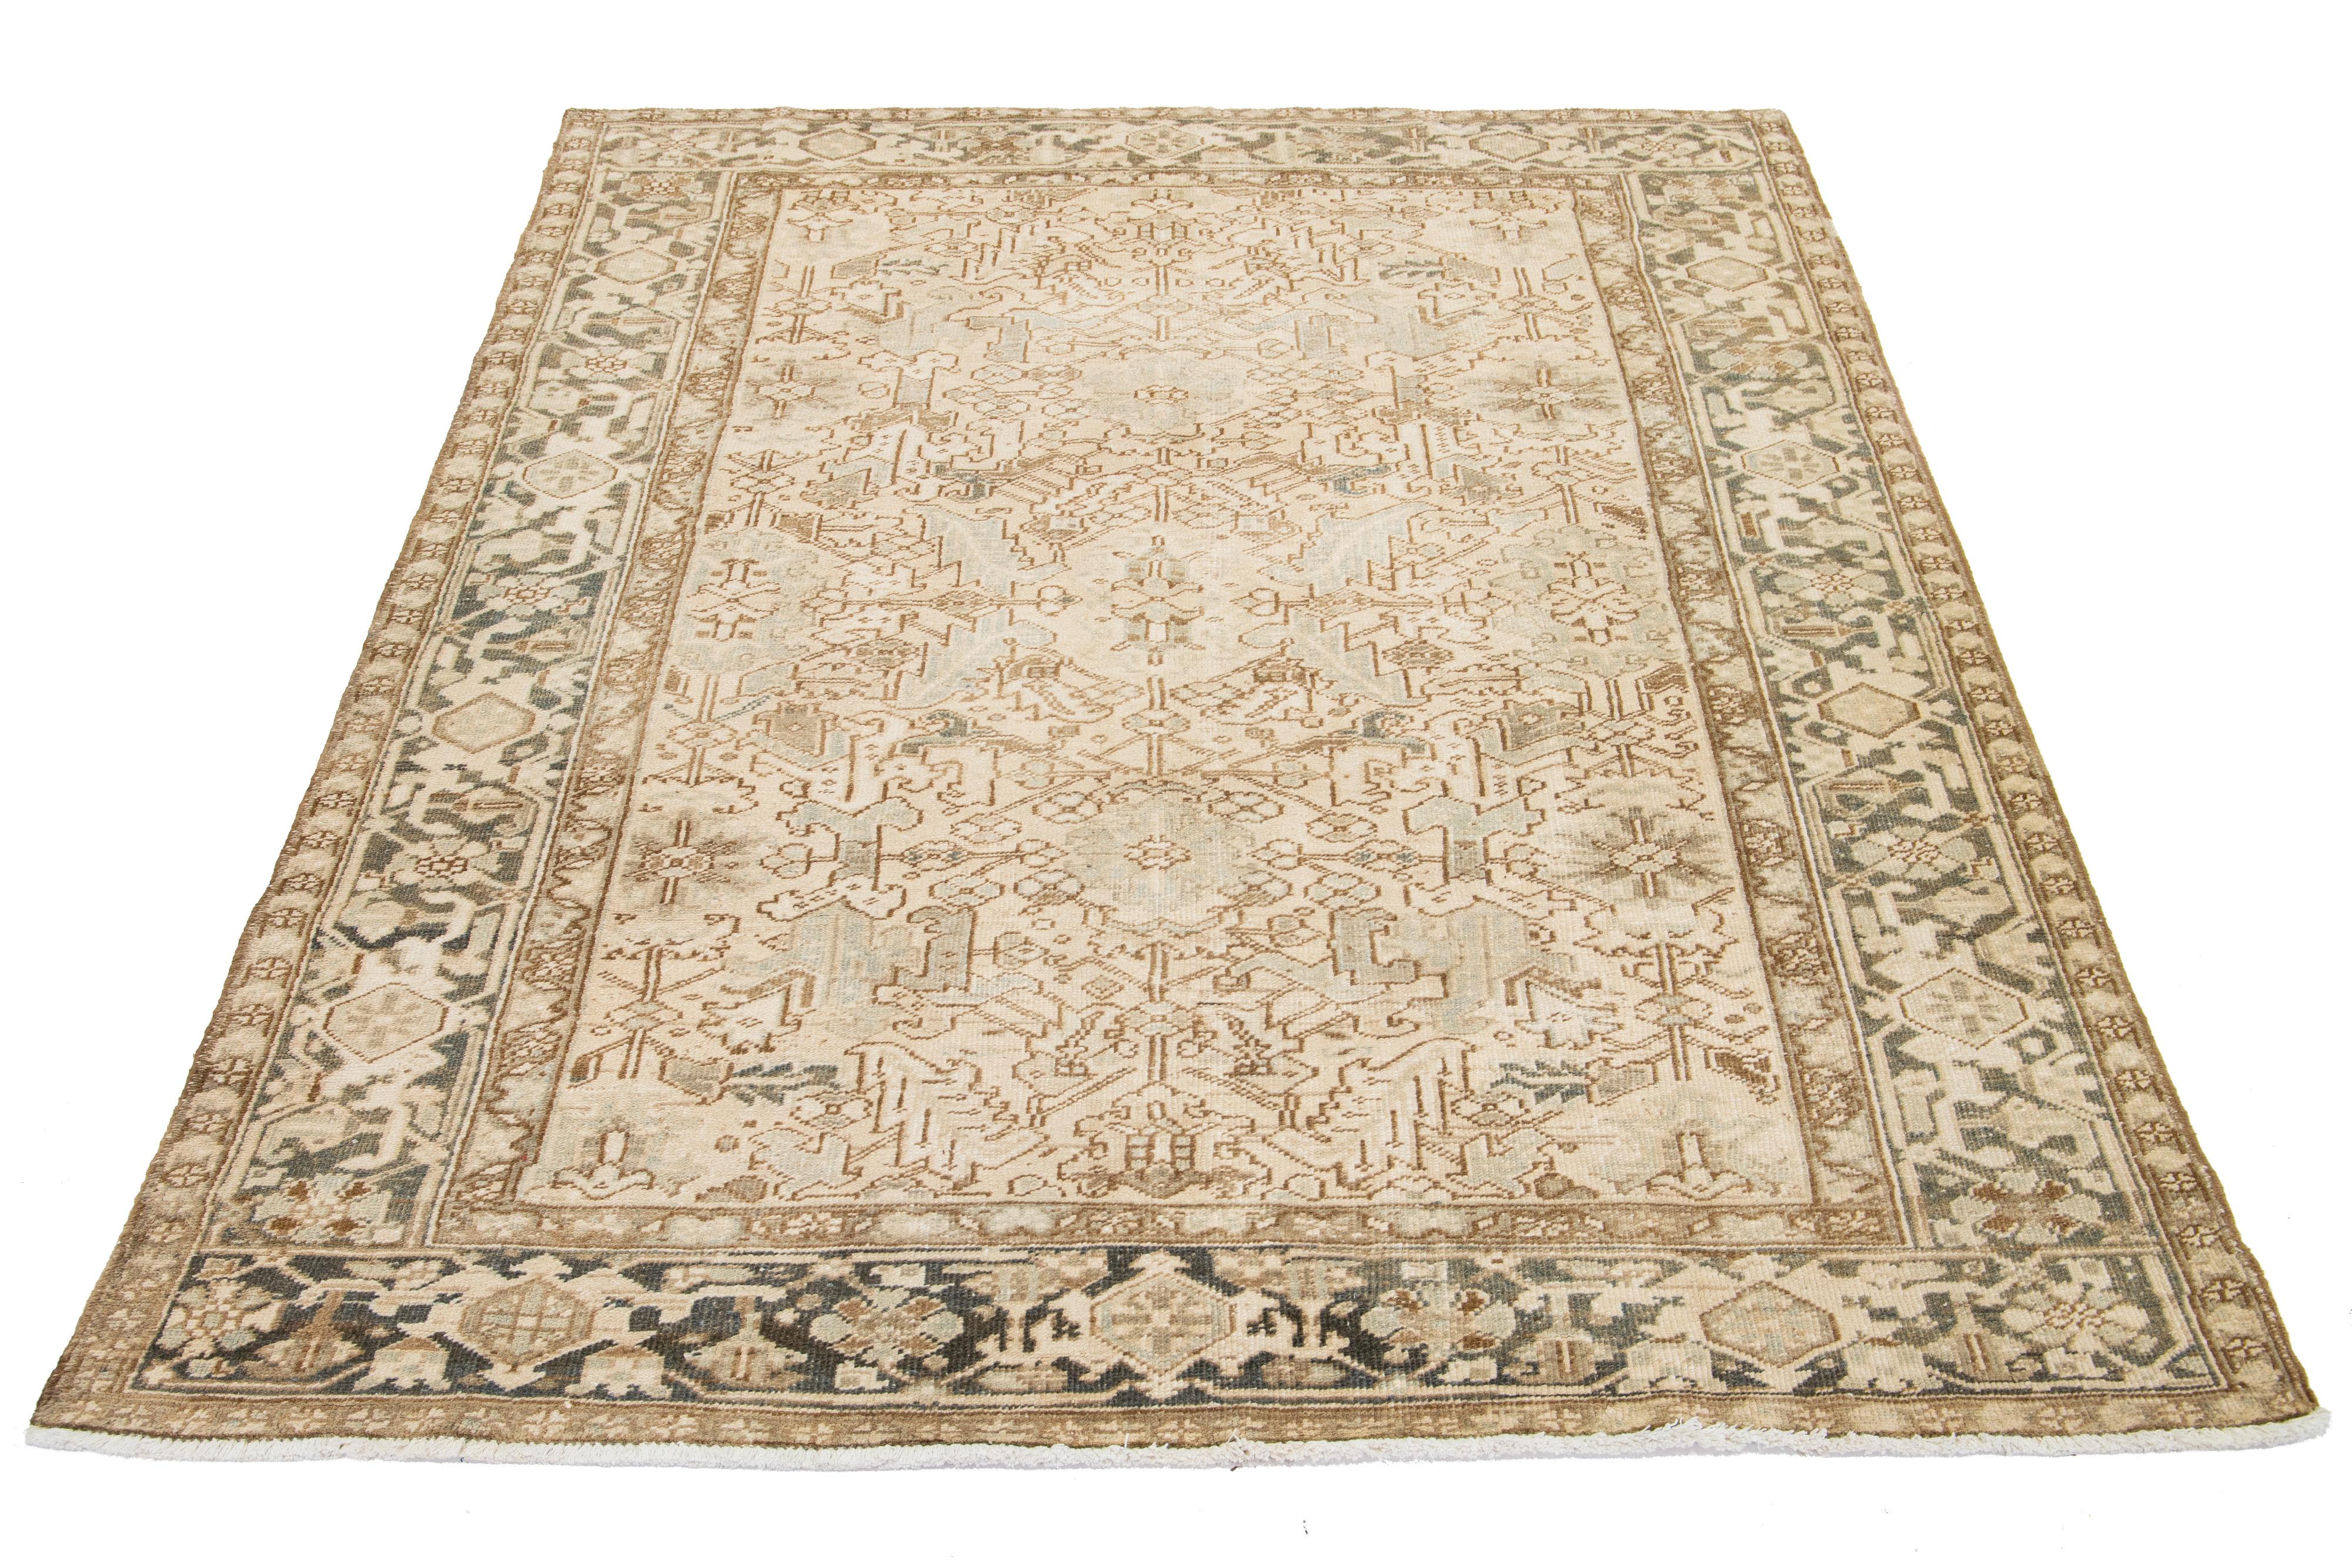 An antique rug from Persia is hand-knotted using wool. It has a beige field with a blue and brown all-over pattern.

This rug measures 6'8' x 8'10